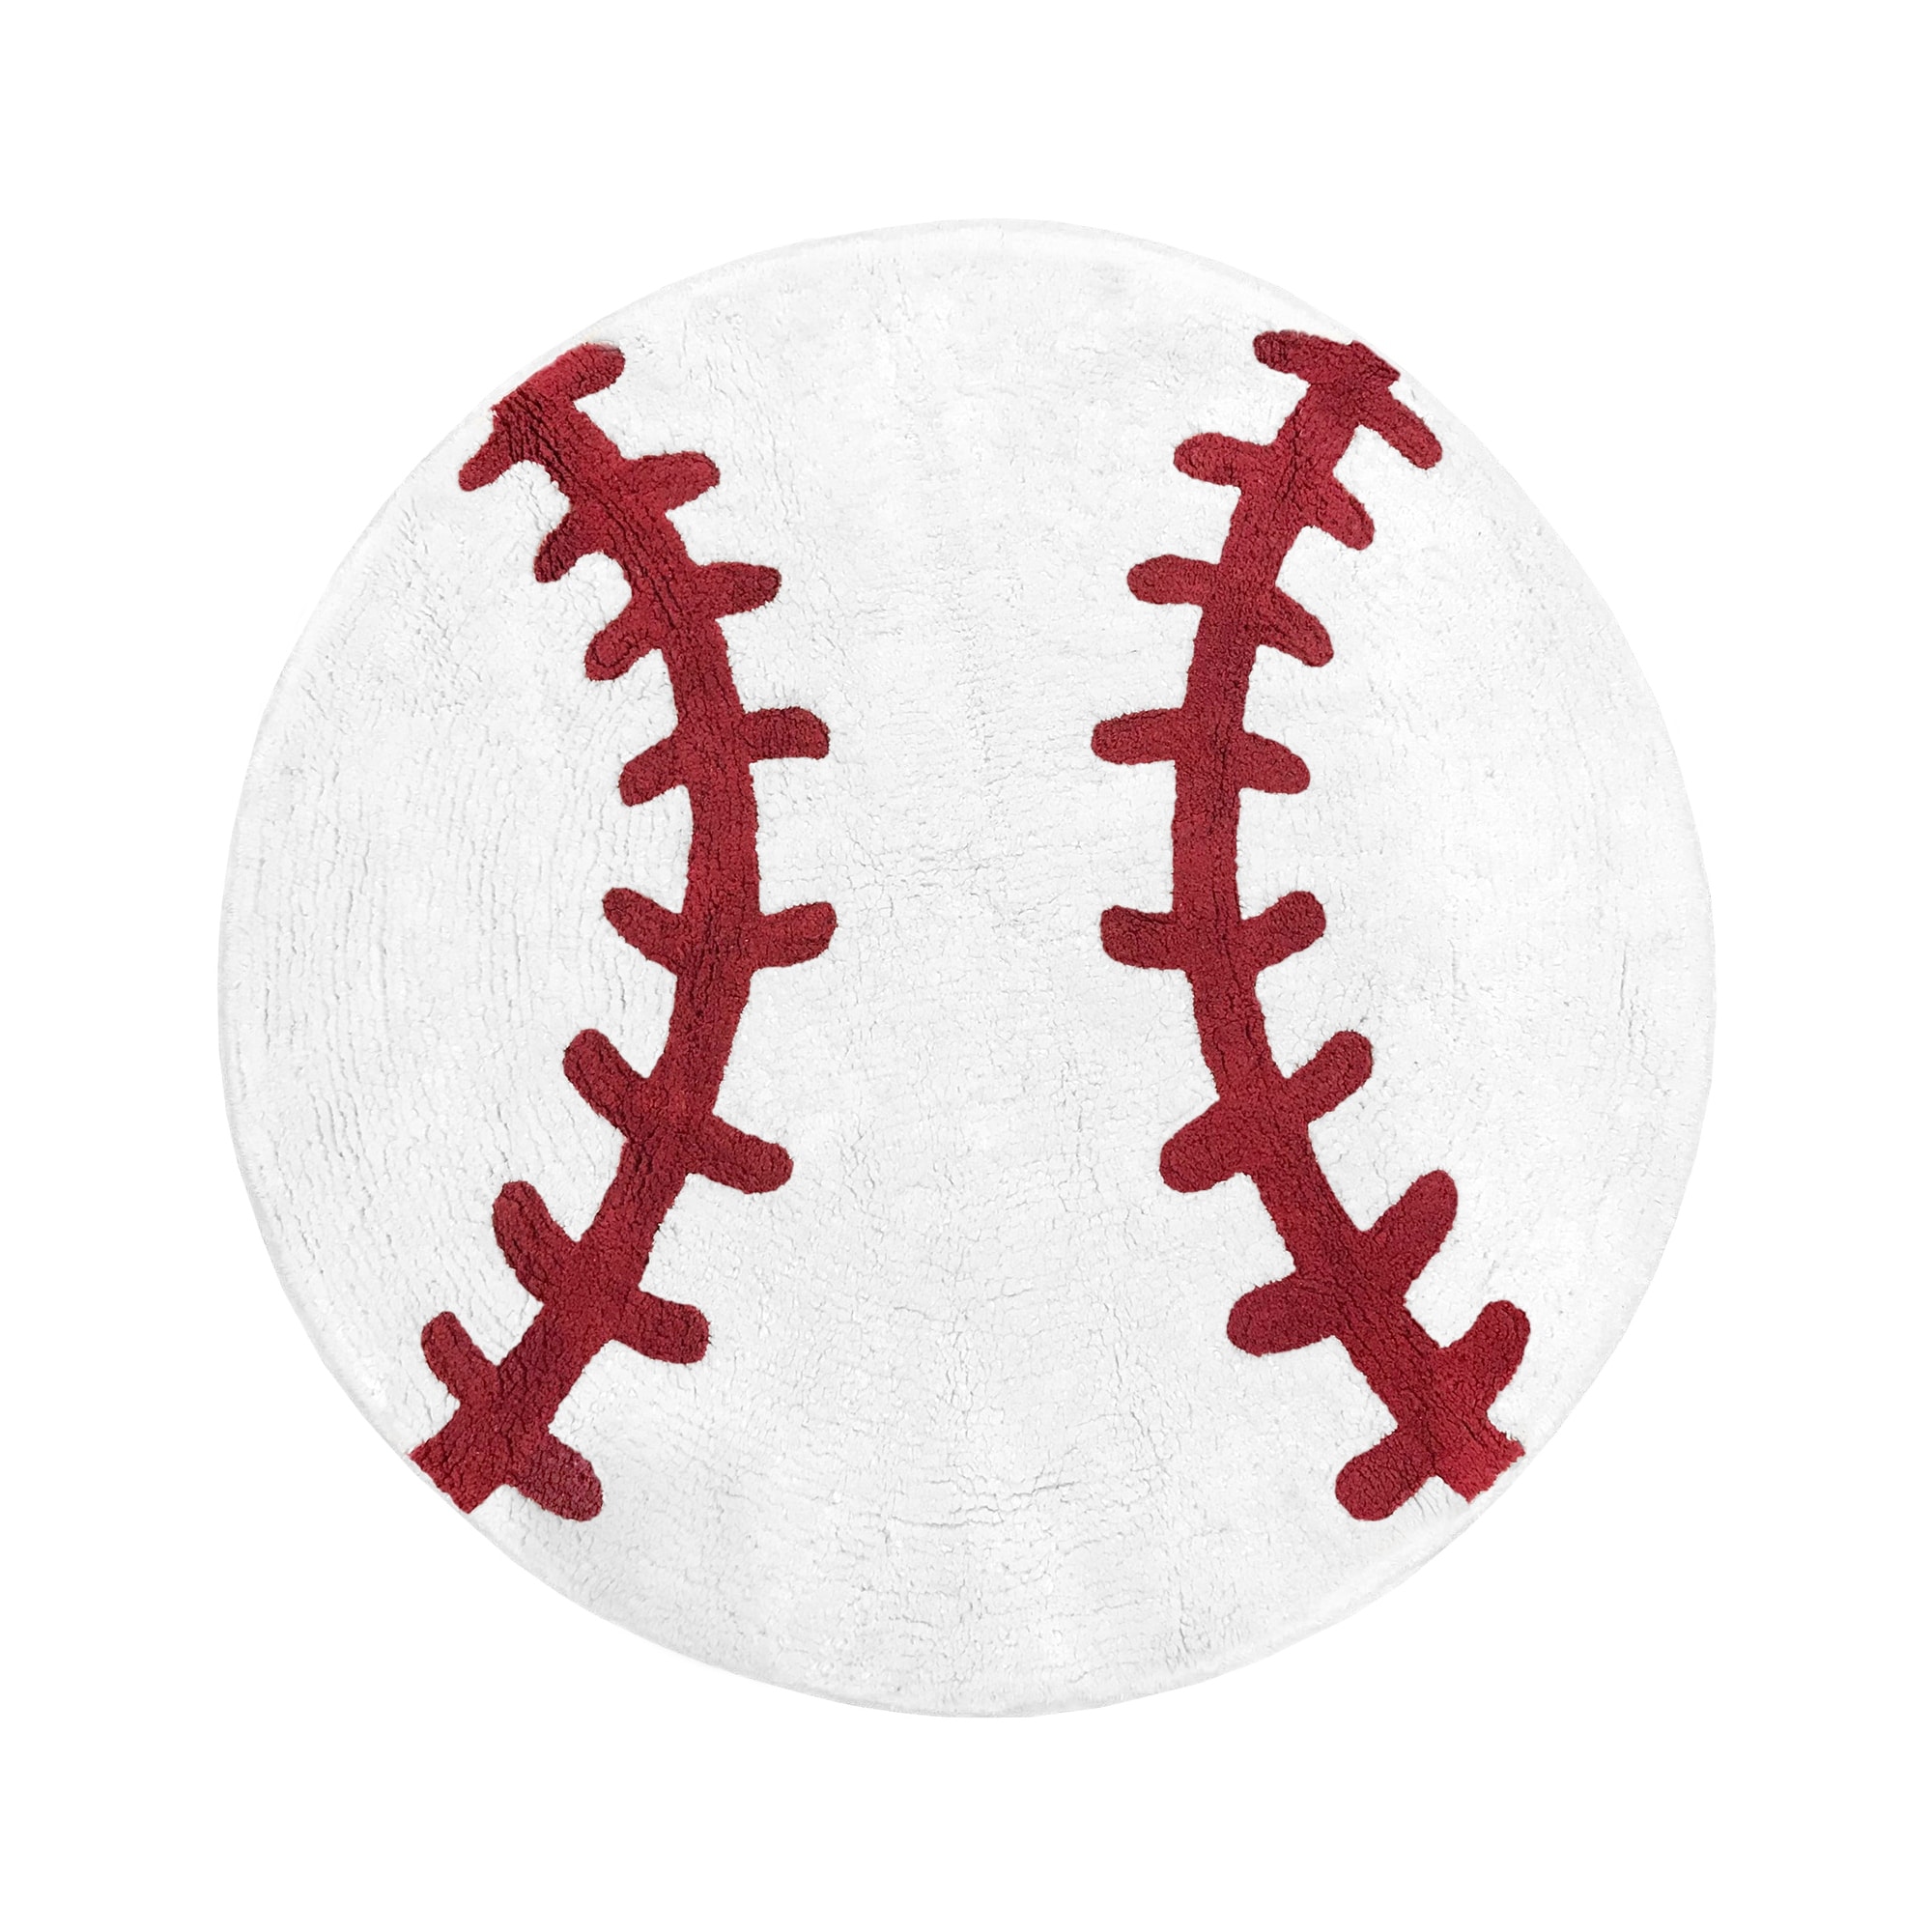  Baseball Area Rug 3x5 Sports Game Accent Rug Baseball Gaming  Gift for Baseball Lover Red Black Decorative Carpet : Home & Kitchen